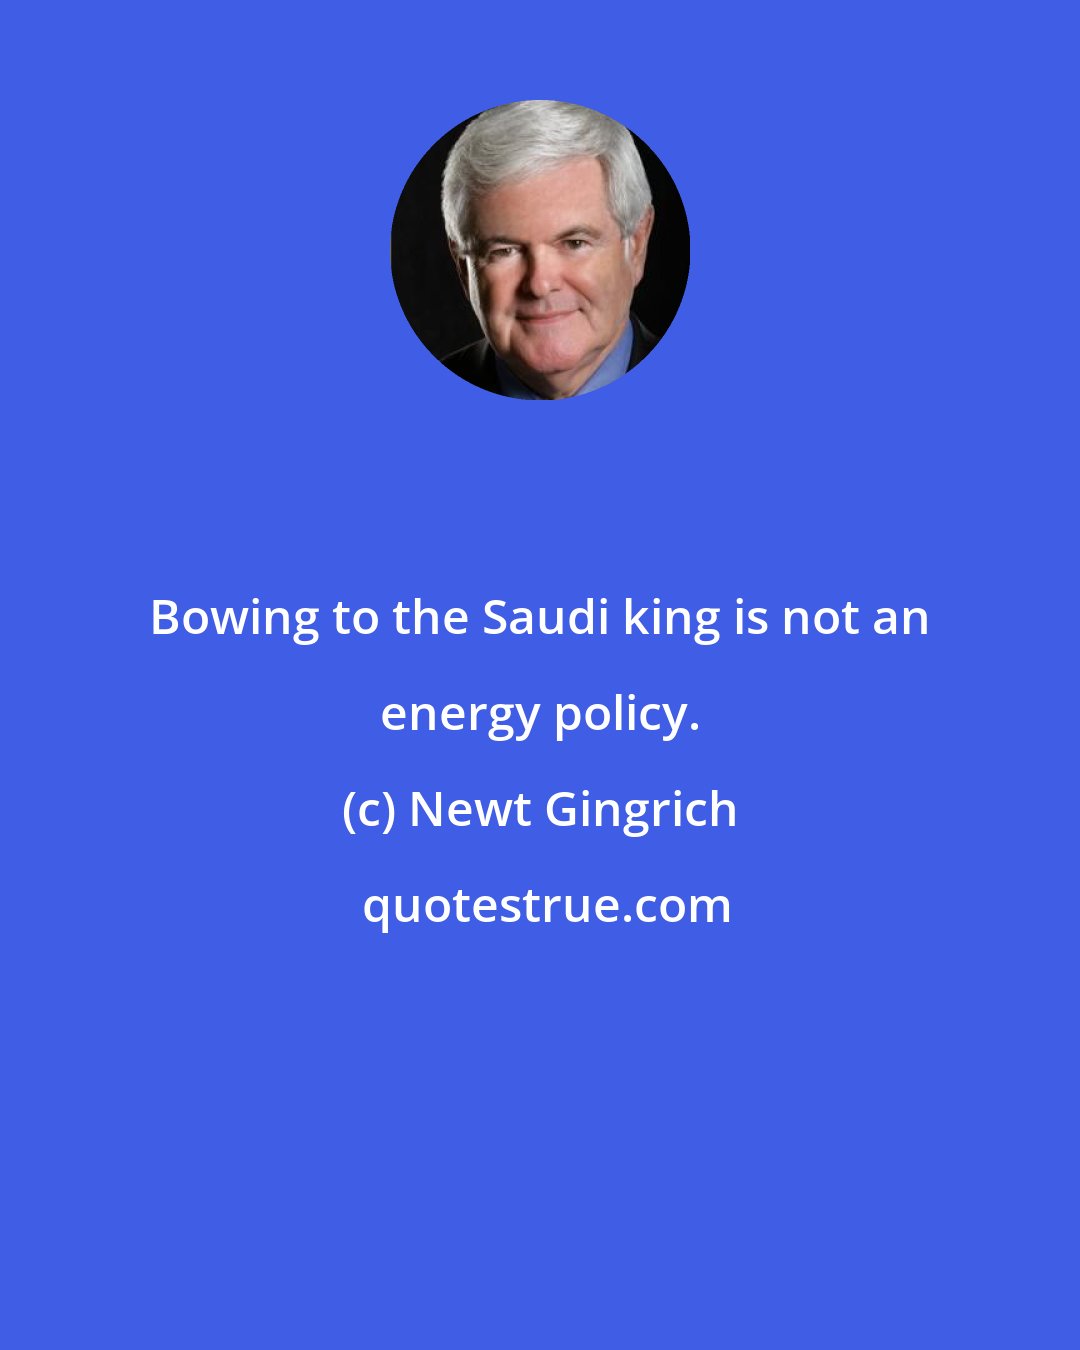 Newt Gingrich: Bowing to the Saudi king is not an energy policy.